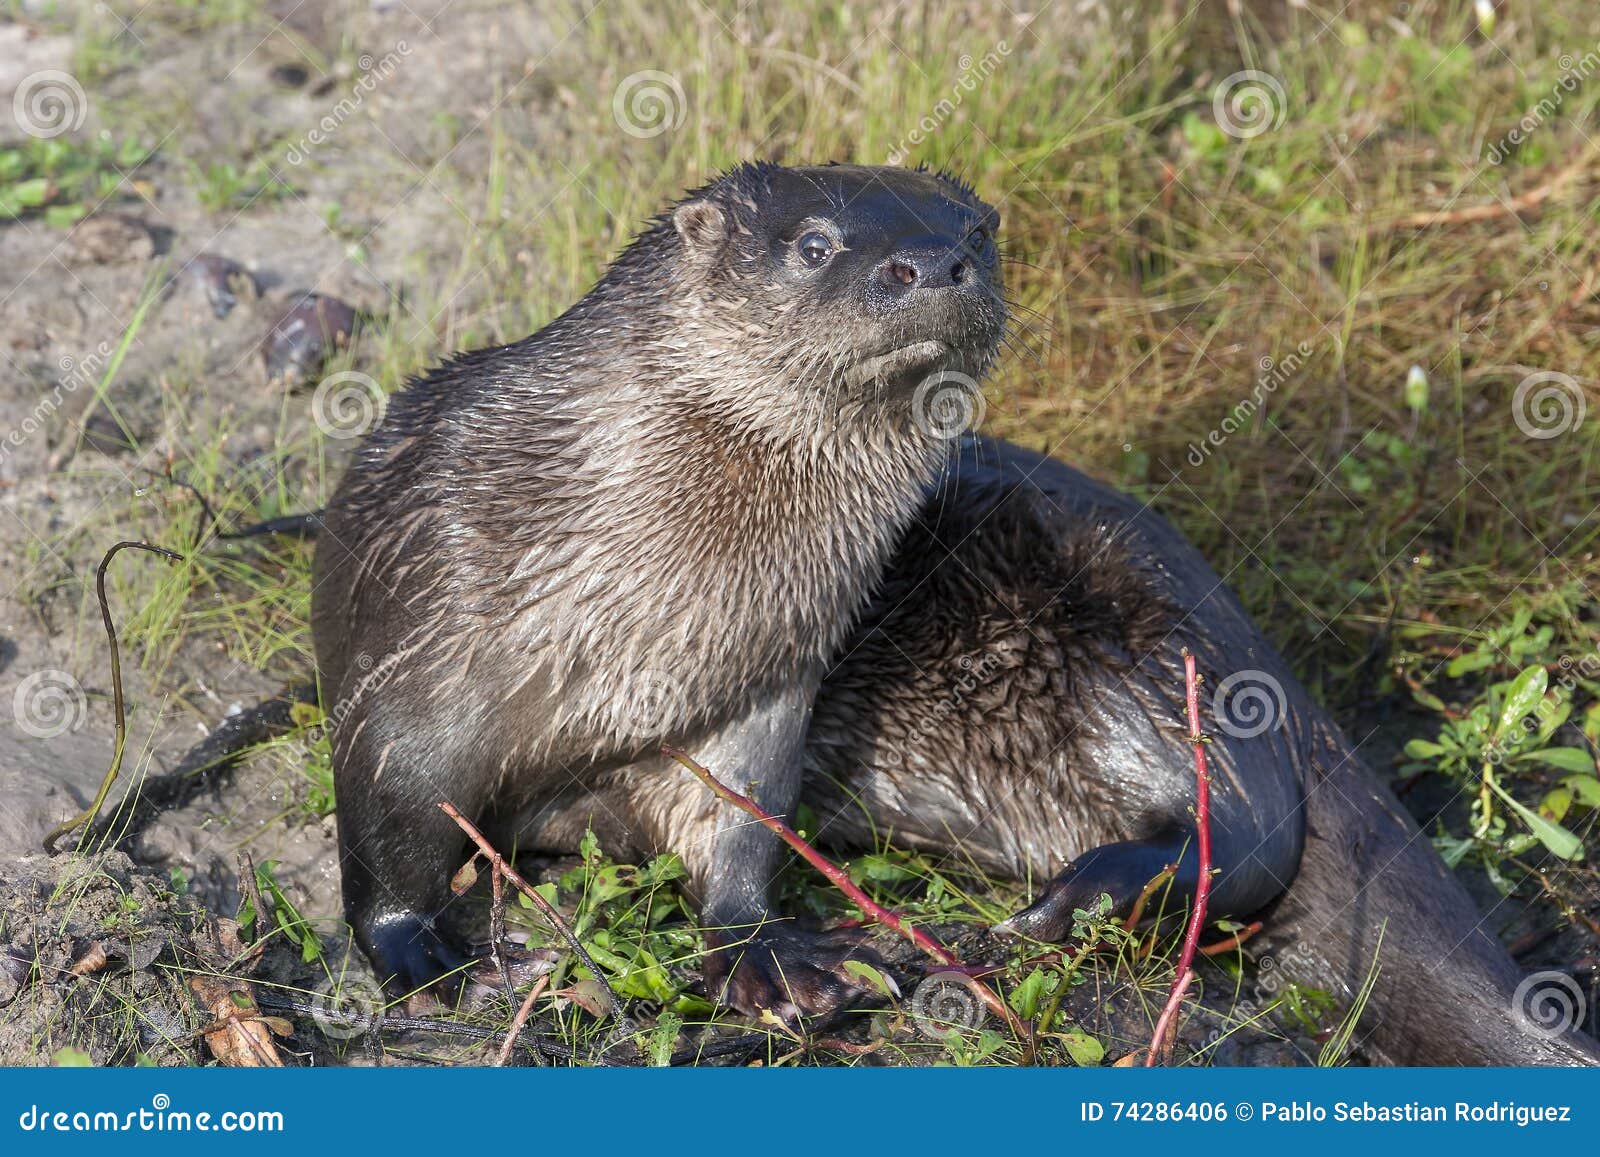 neotropical otter